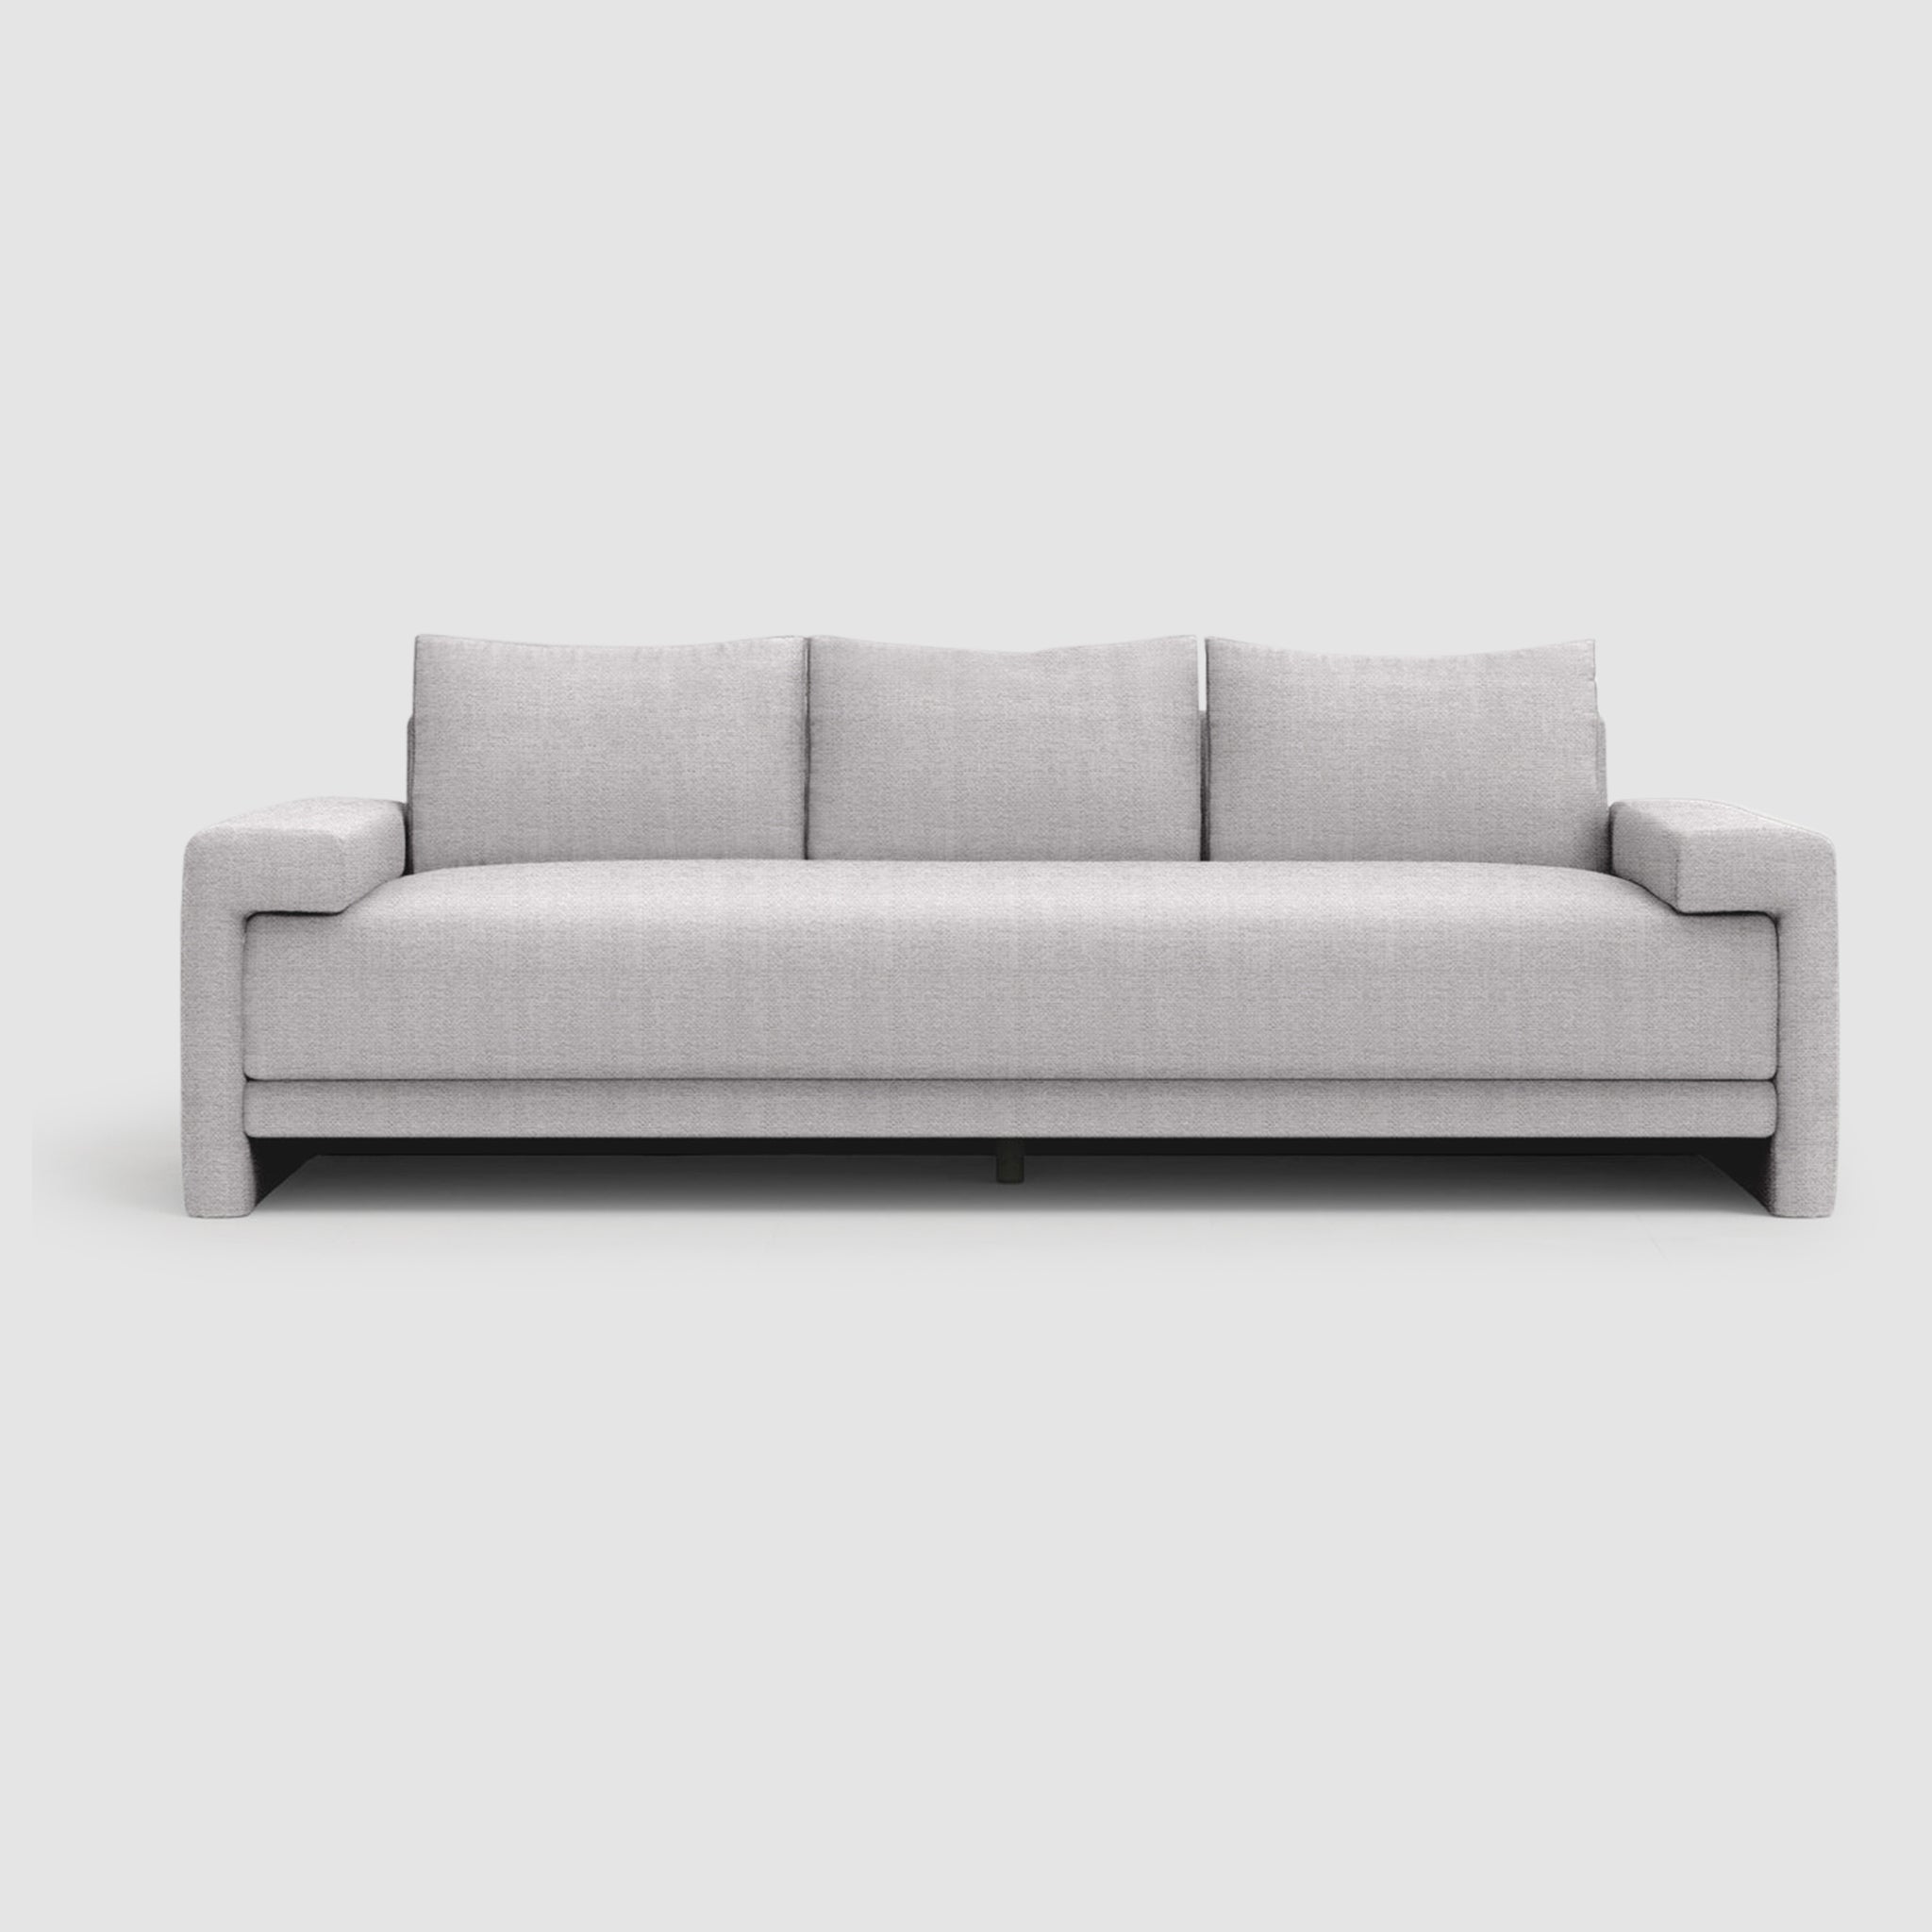 A modern sofa with three large back cushions and straight arms. The sofa sits on a lifted base with curved black steel legs.